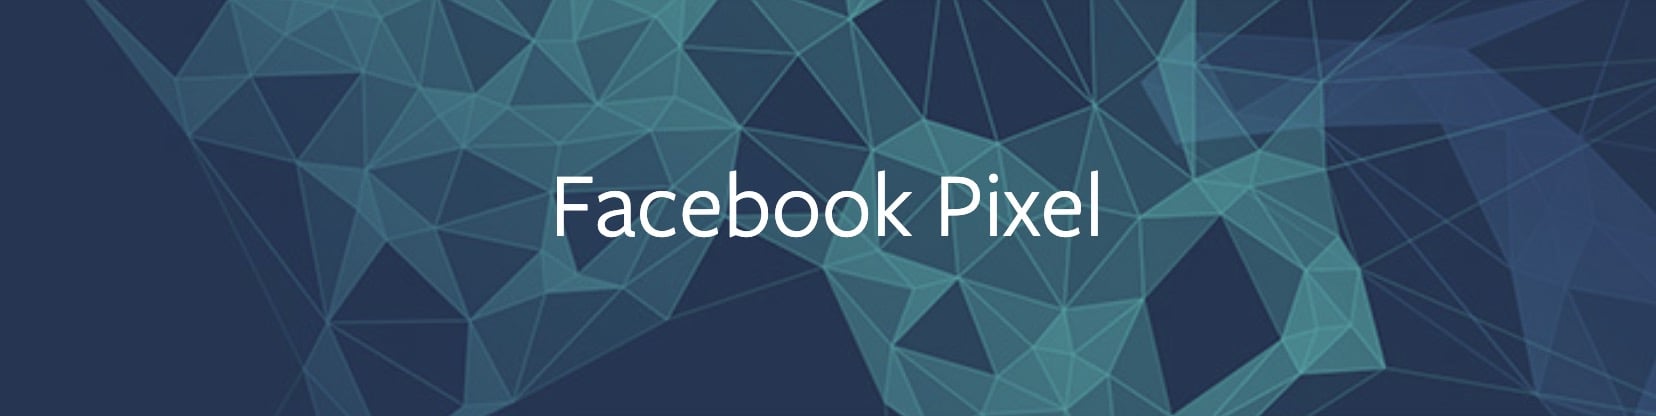 Do You Need the Facebook Pixel on Your WordPress Site?